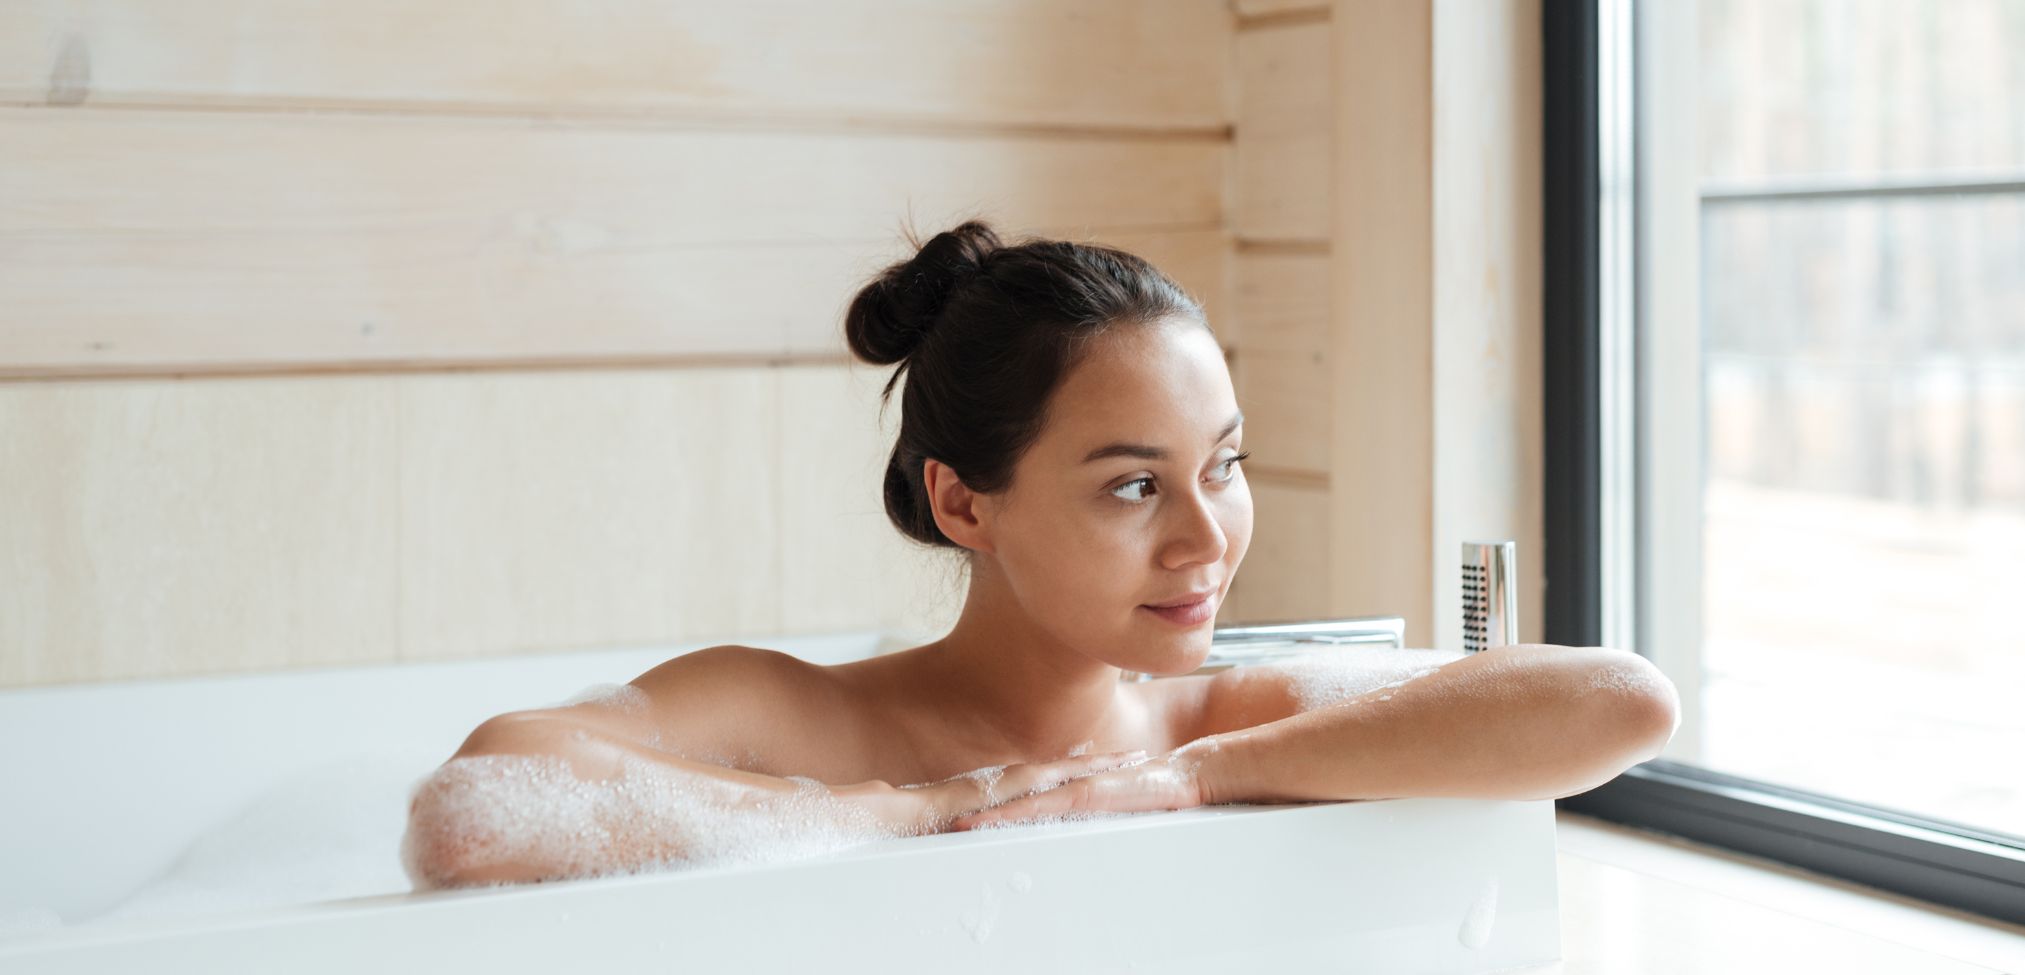 bathing regularly helps with intimate hygiene